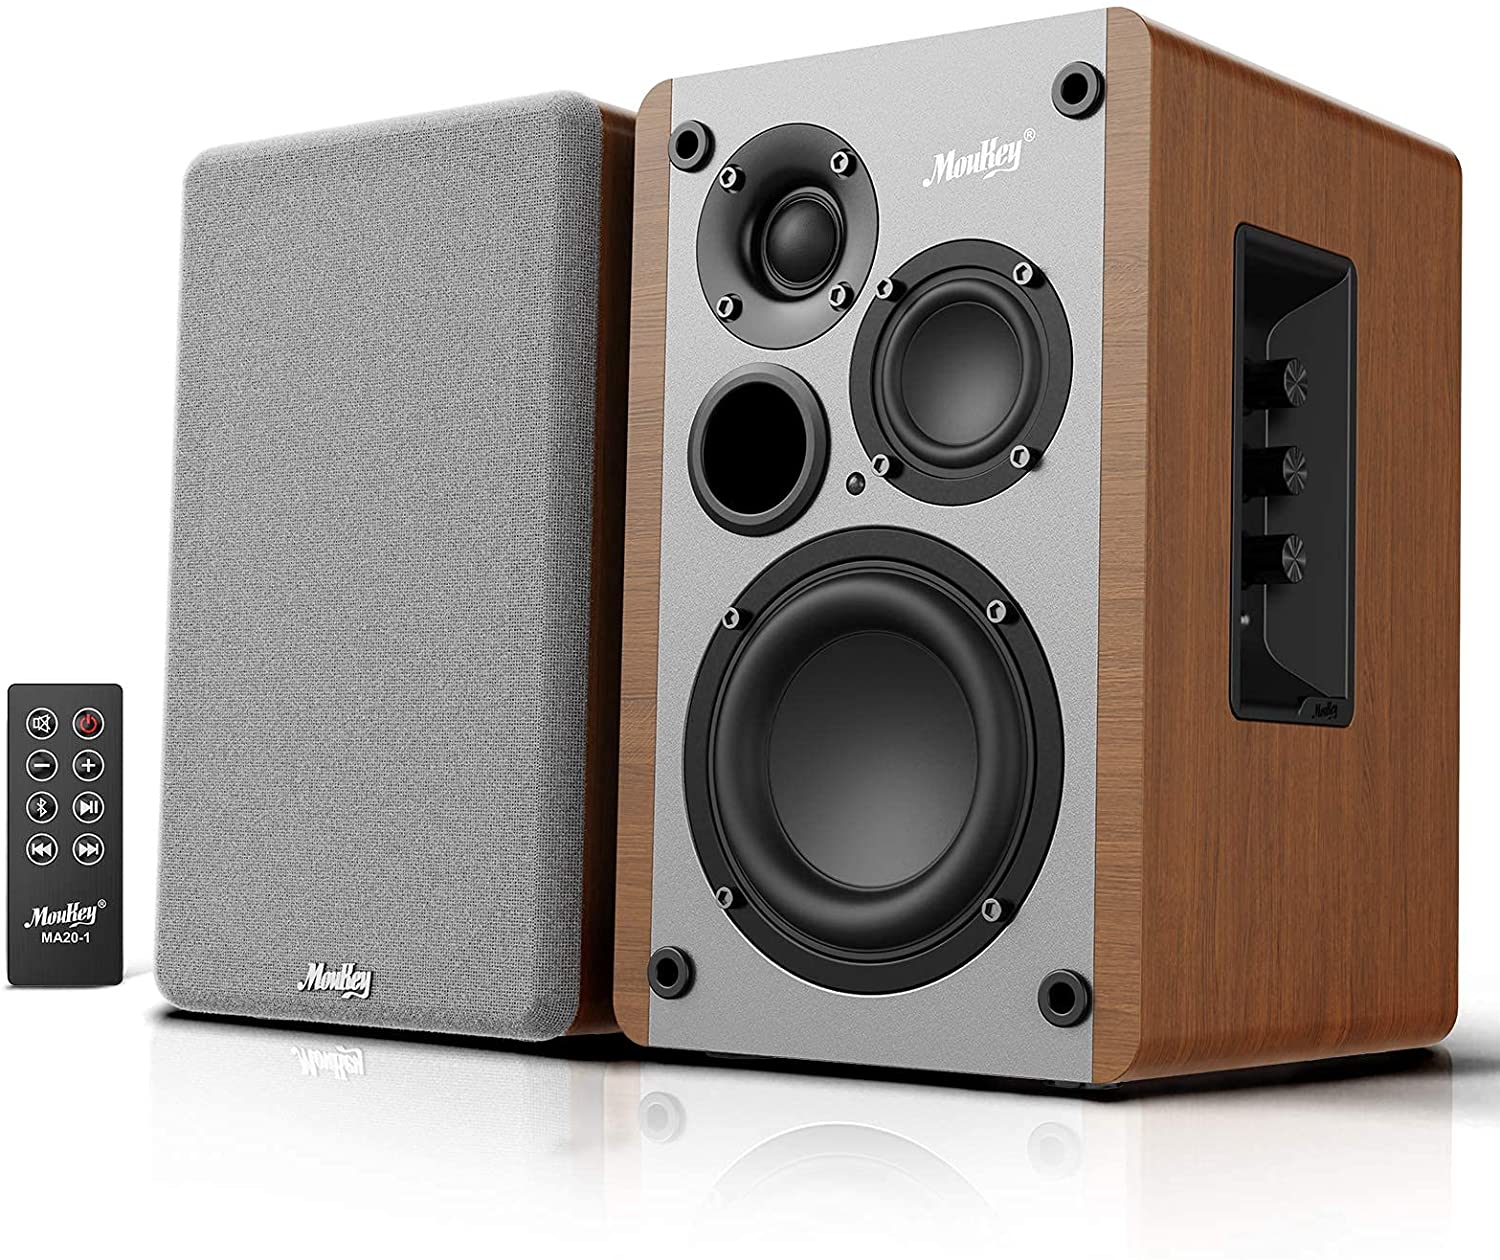 Moukey Powered Bookshelf Speakers Pair- Bluetooth 5.0 Studio Monitors, 3 Way 4+2+1‘’ Speakers, Wooden 2.0 Stereo Active Speakers - 50 Watts RMS (MA20-1), Lime - image 1 of 7